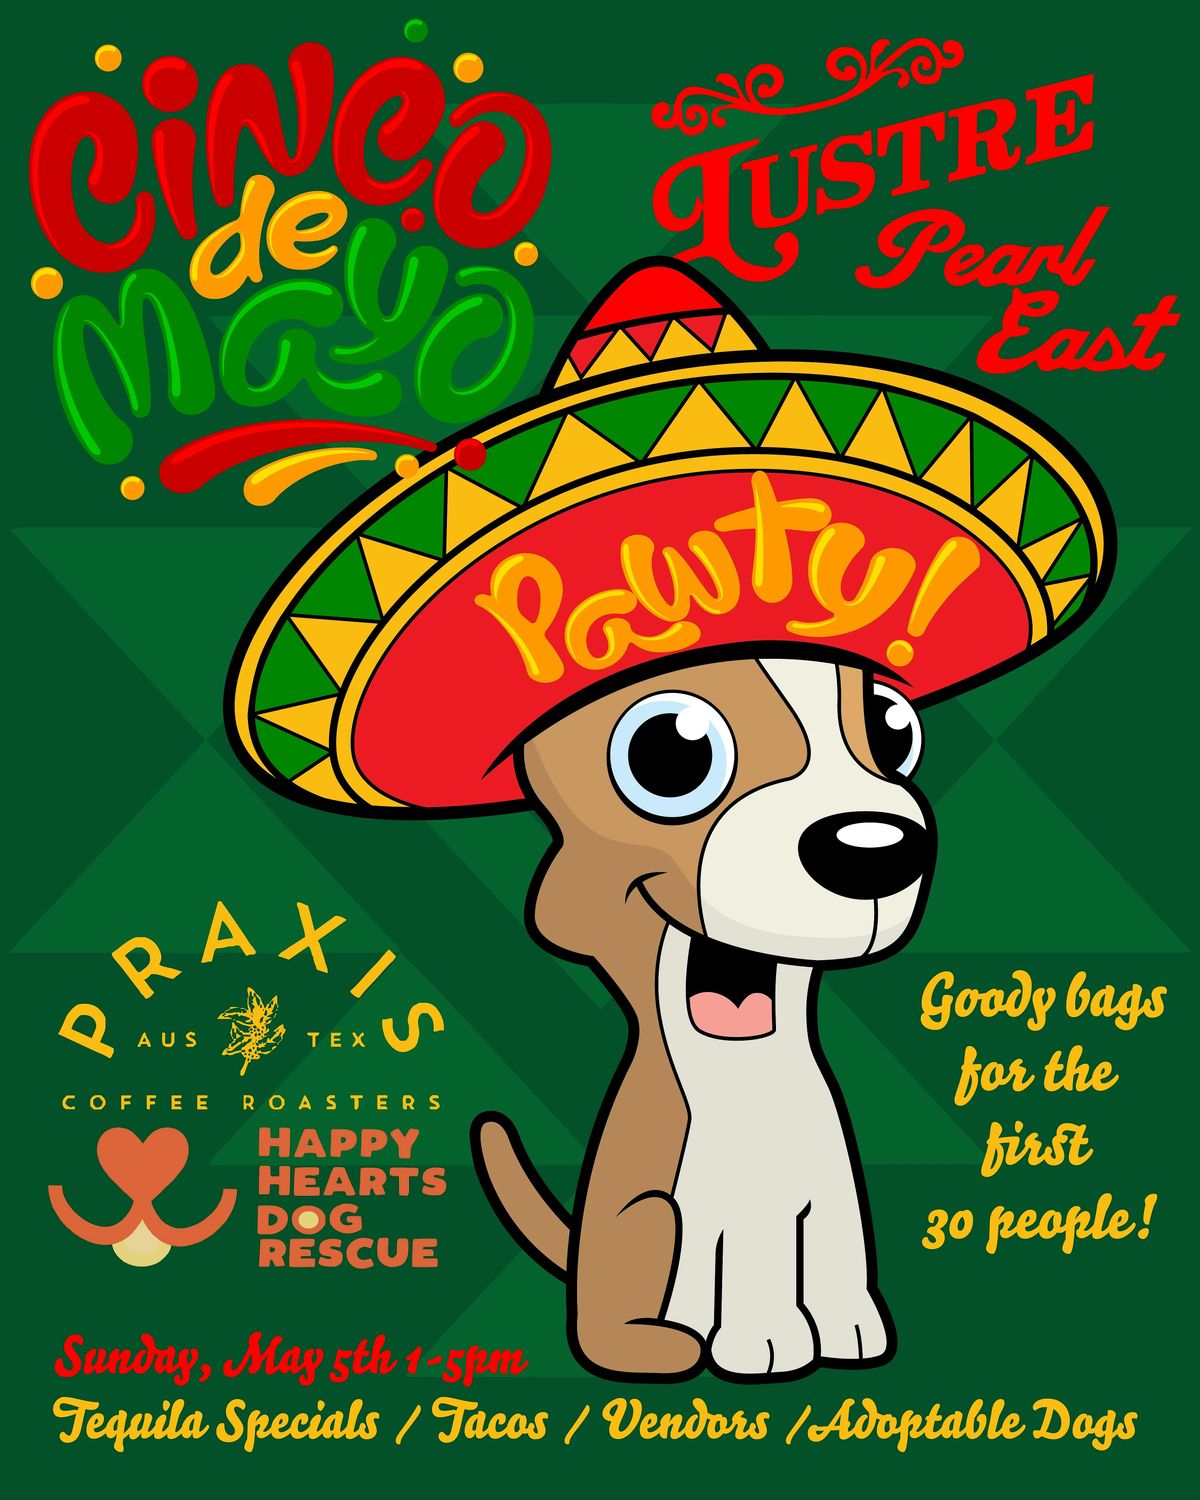 Cinco de Mayo Pawty at Lustre Pearl East!